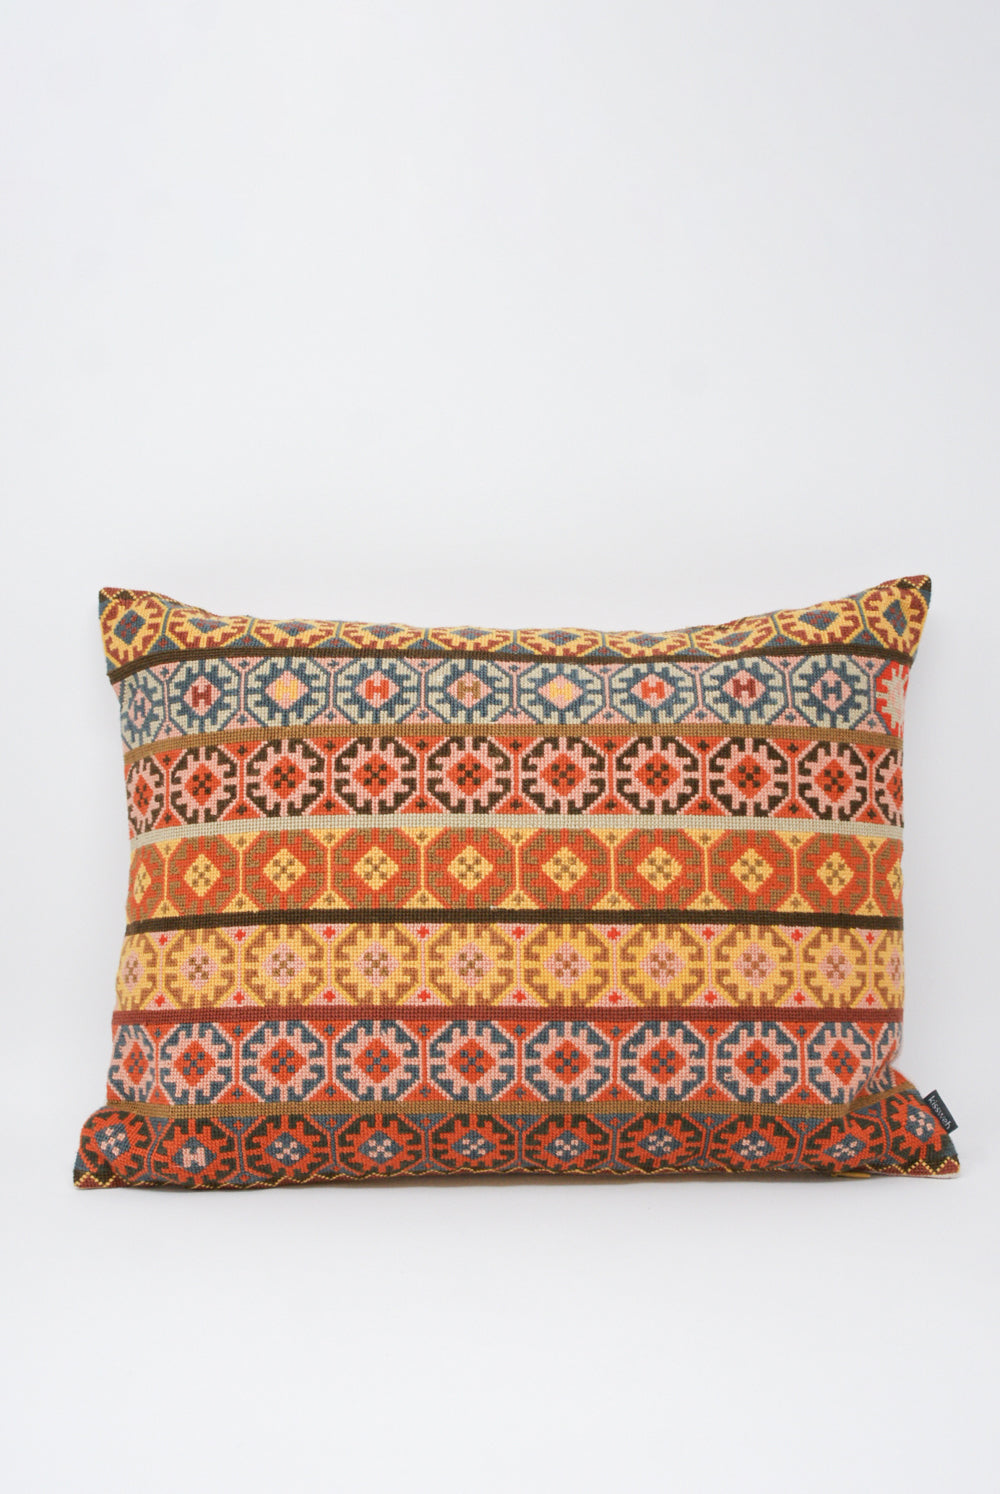 Kissweh Wafa'a Hand Embroidered Pillow in Autumn A